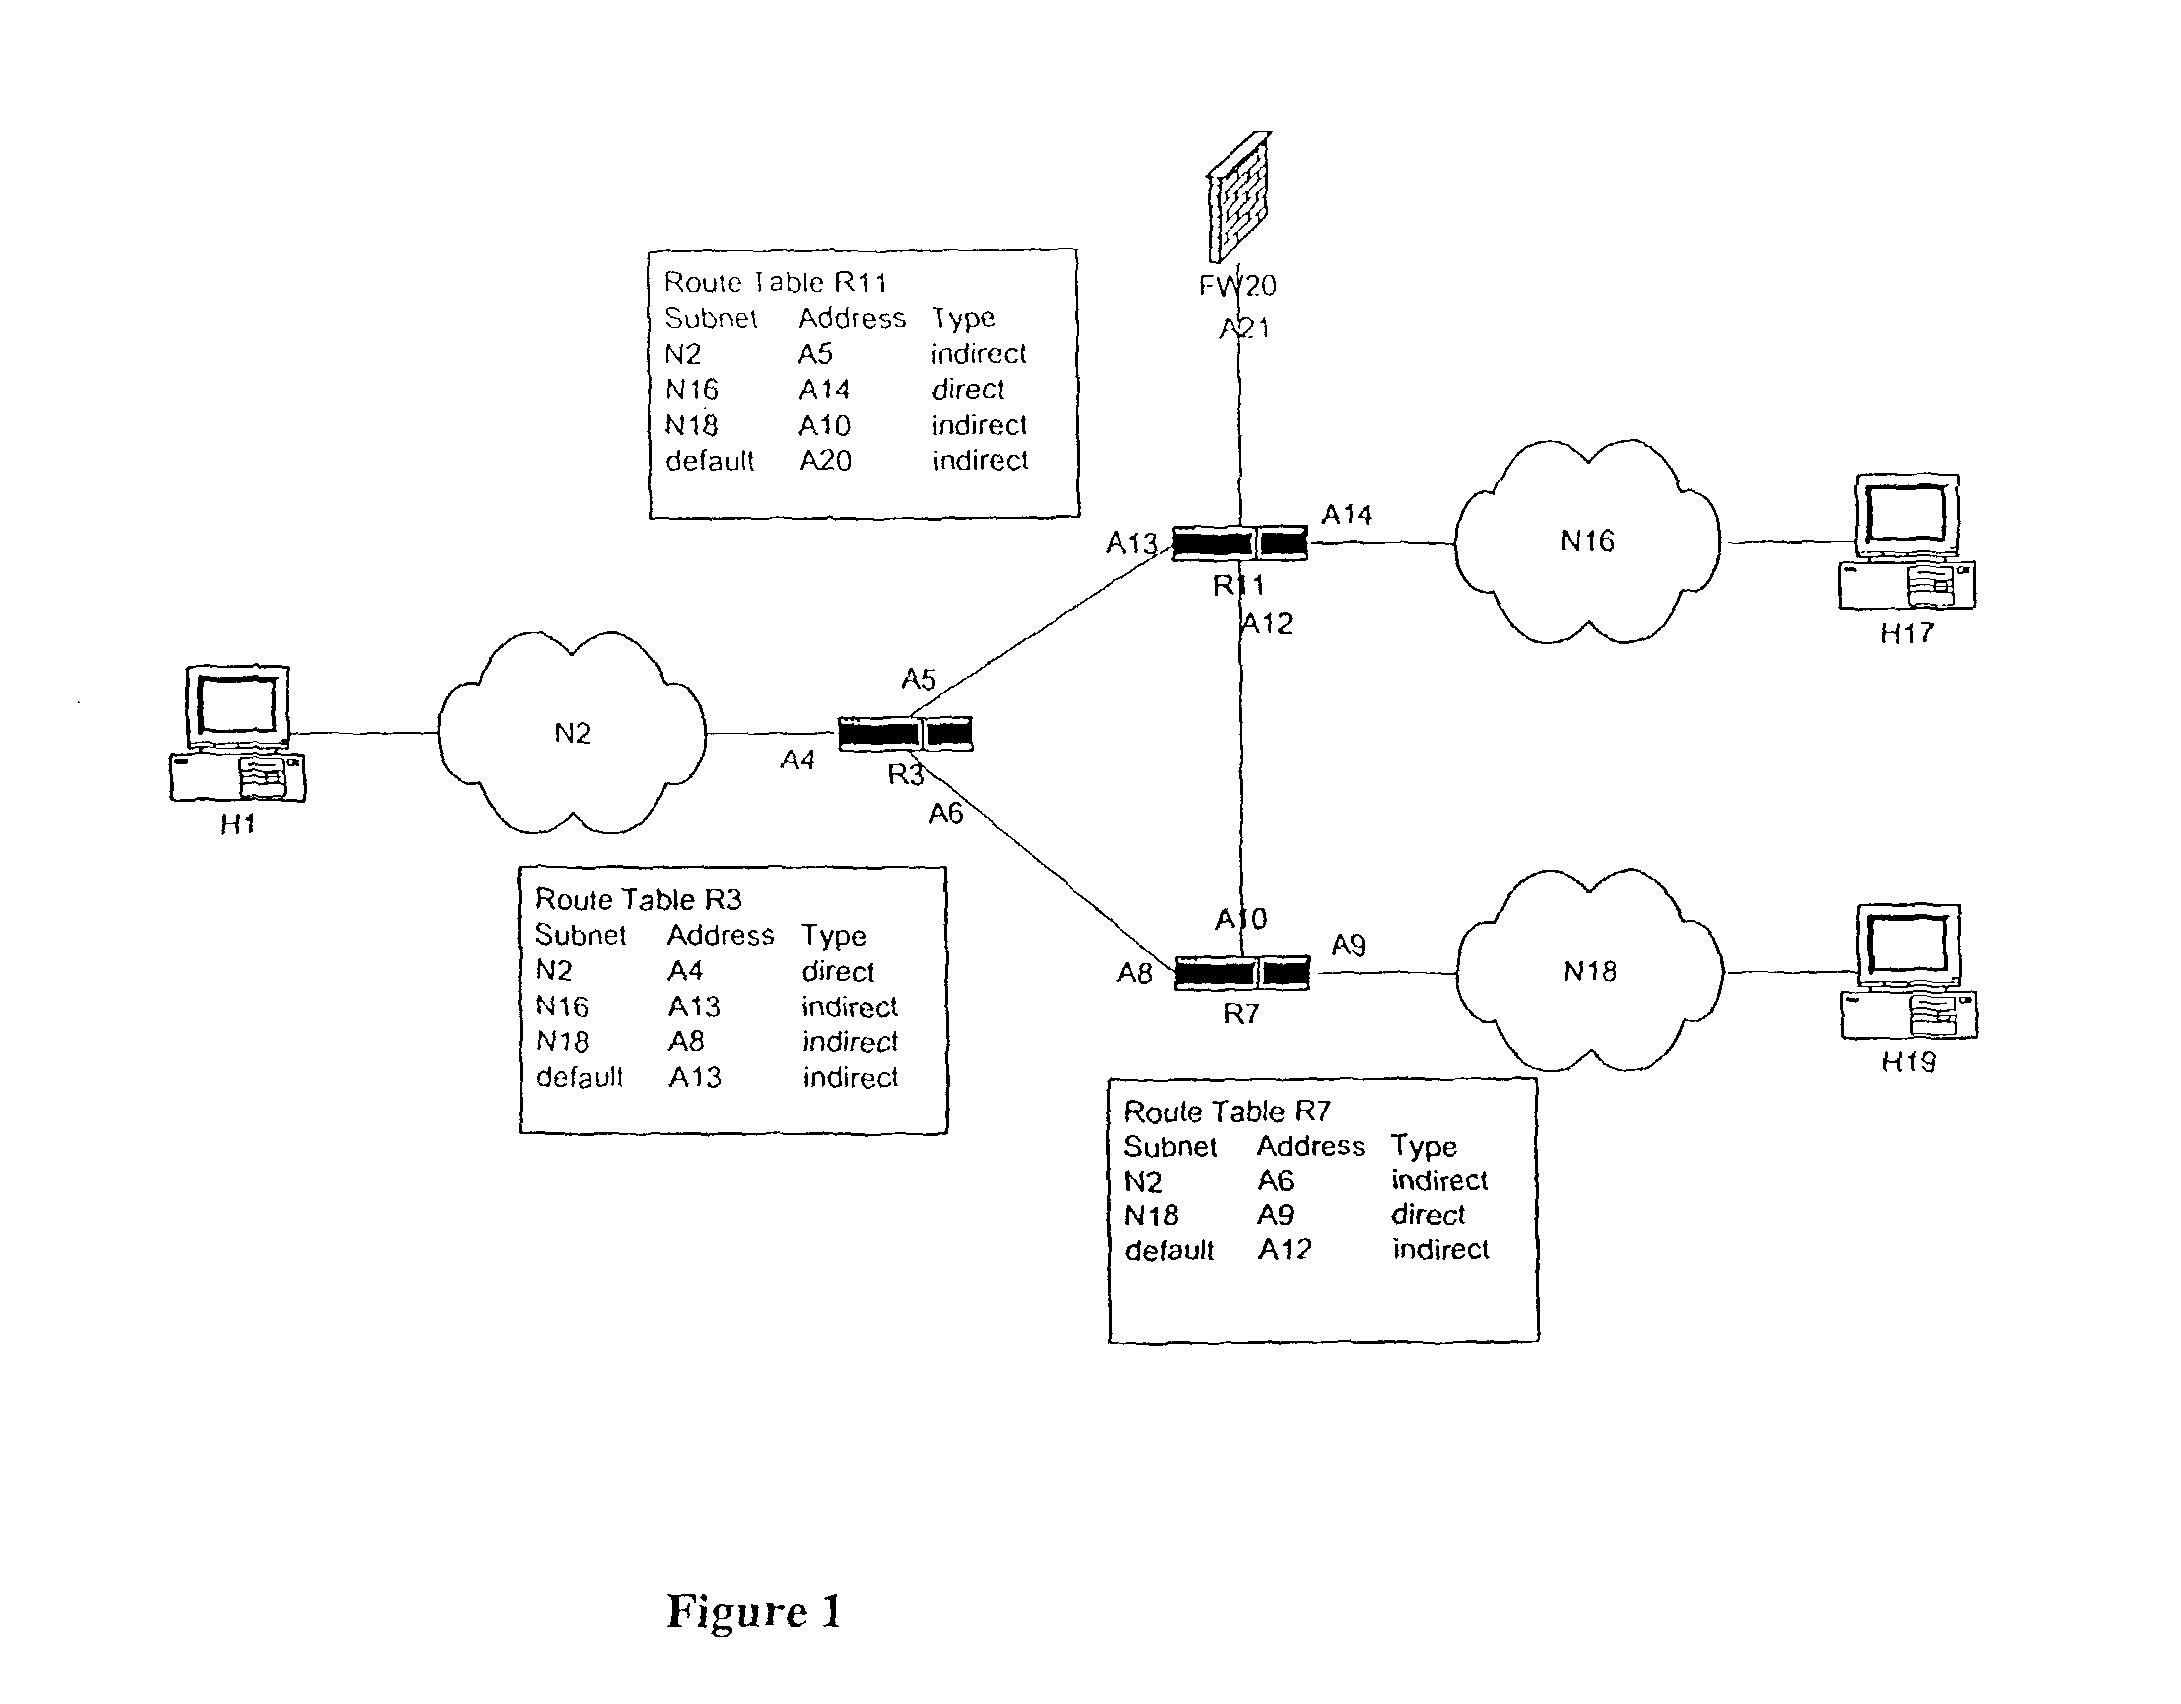 Network topology discovery systems and methods